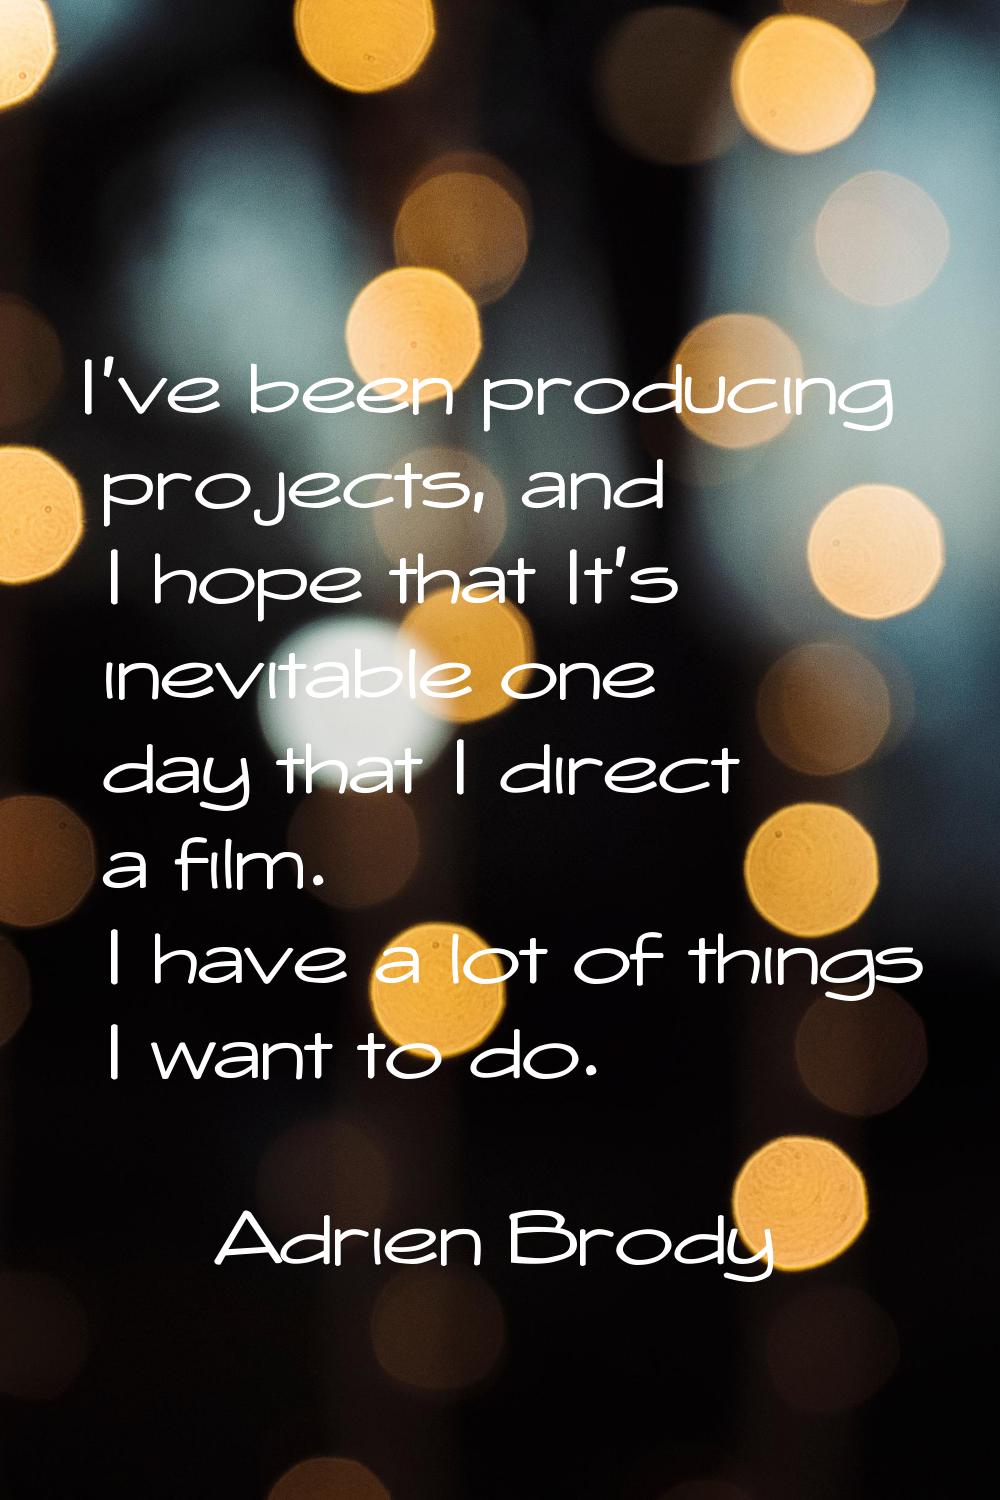 I've been producing projects, and I hope that It's inevitable one day that I direct a film. I have 